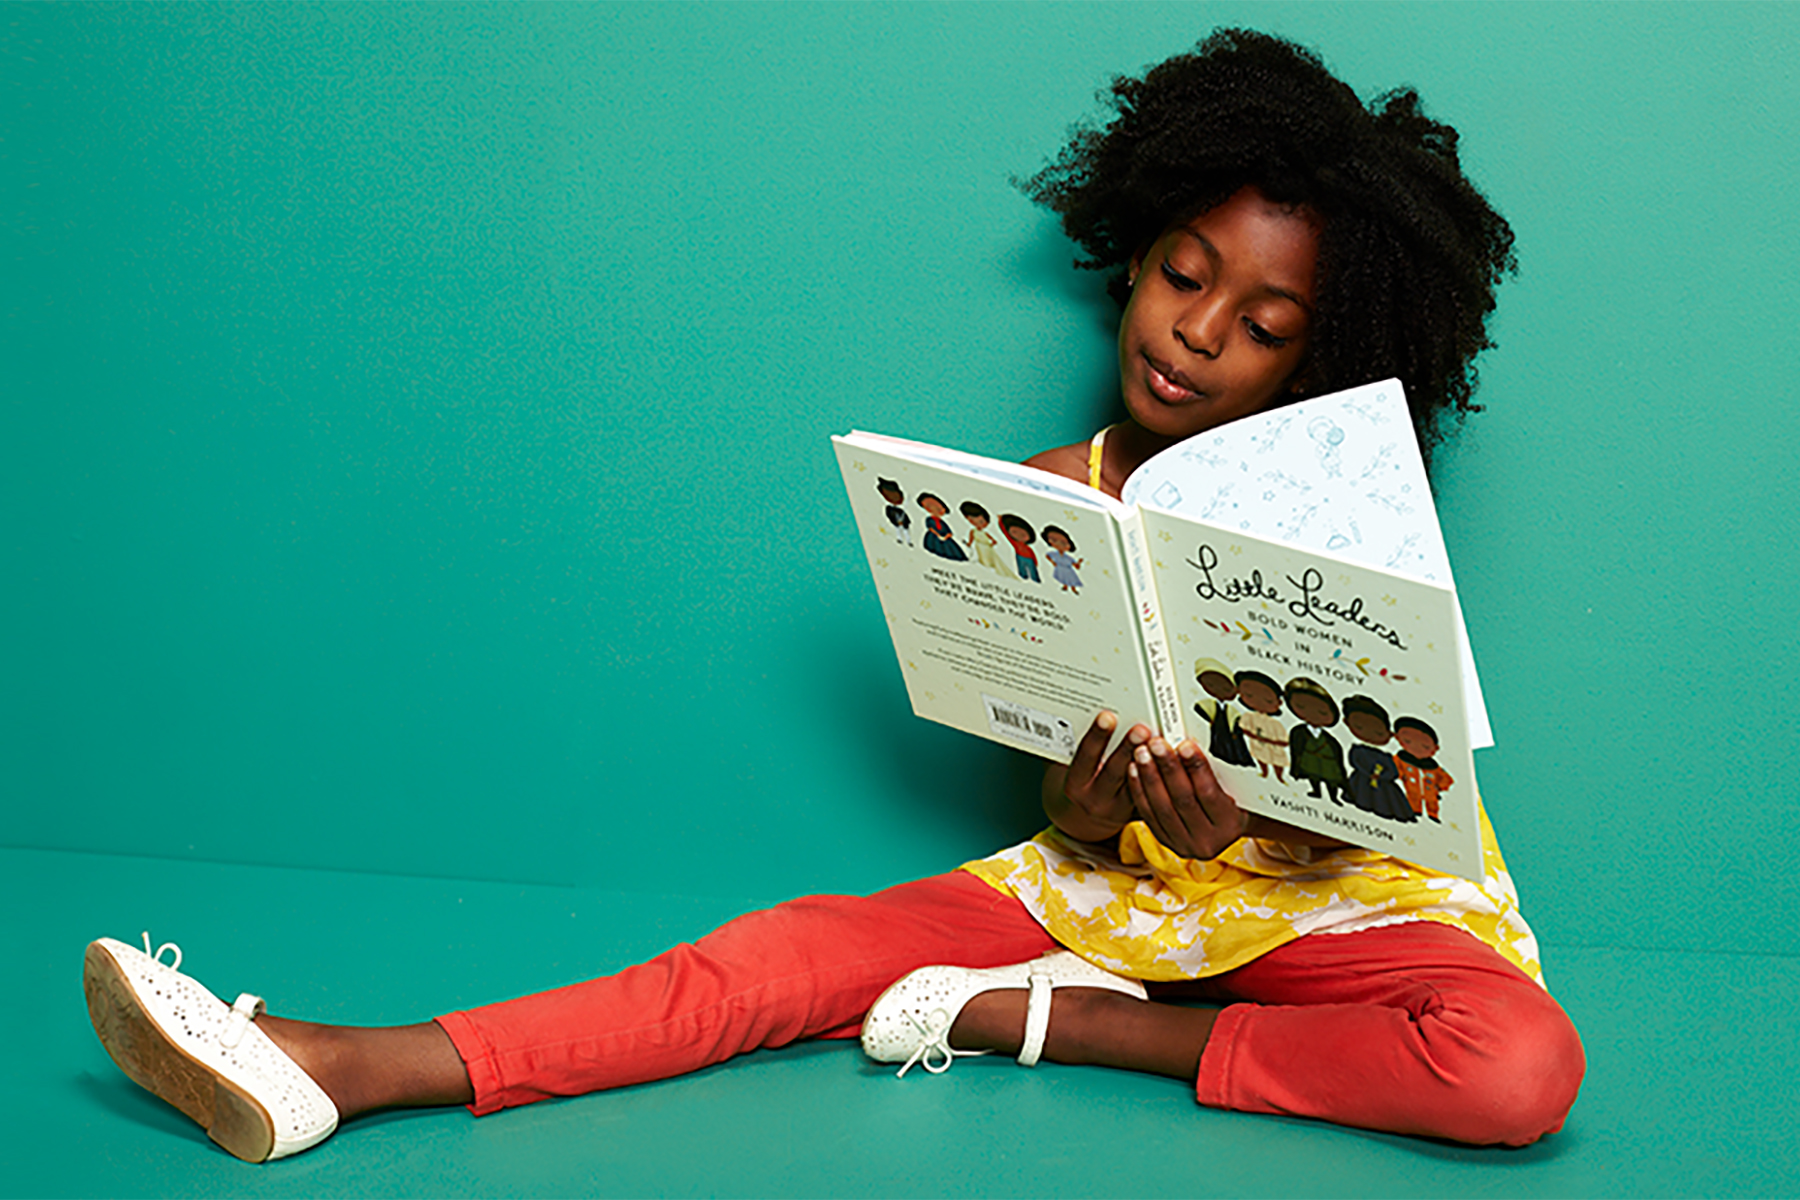 A photo of a young girl against a green background sitting down and reading a book